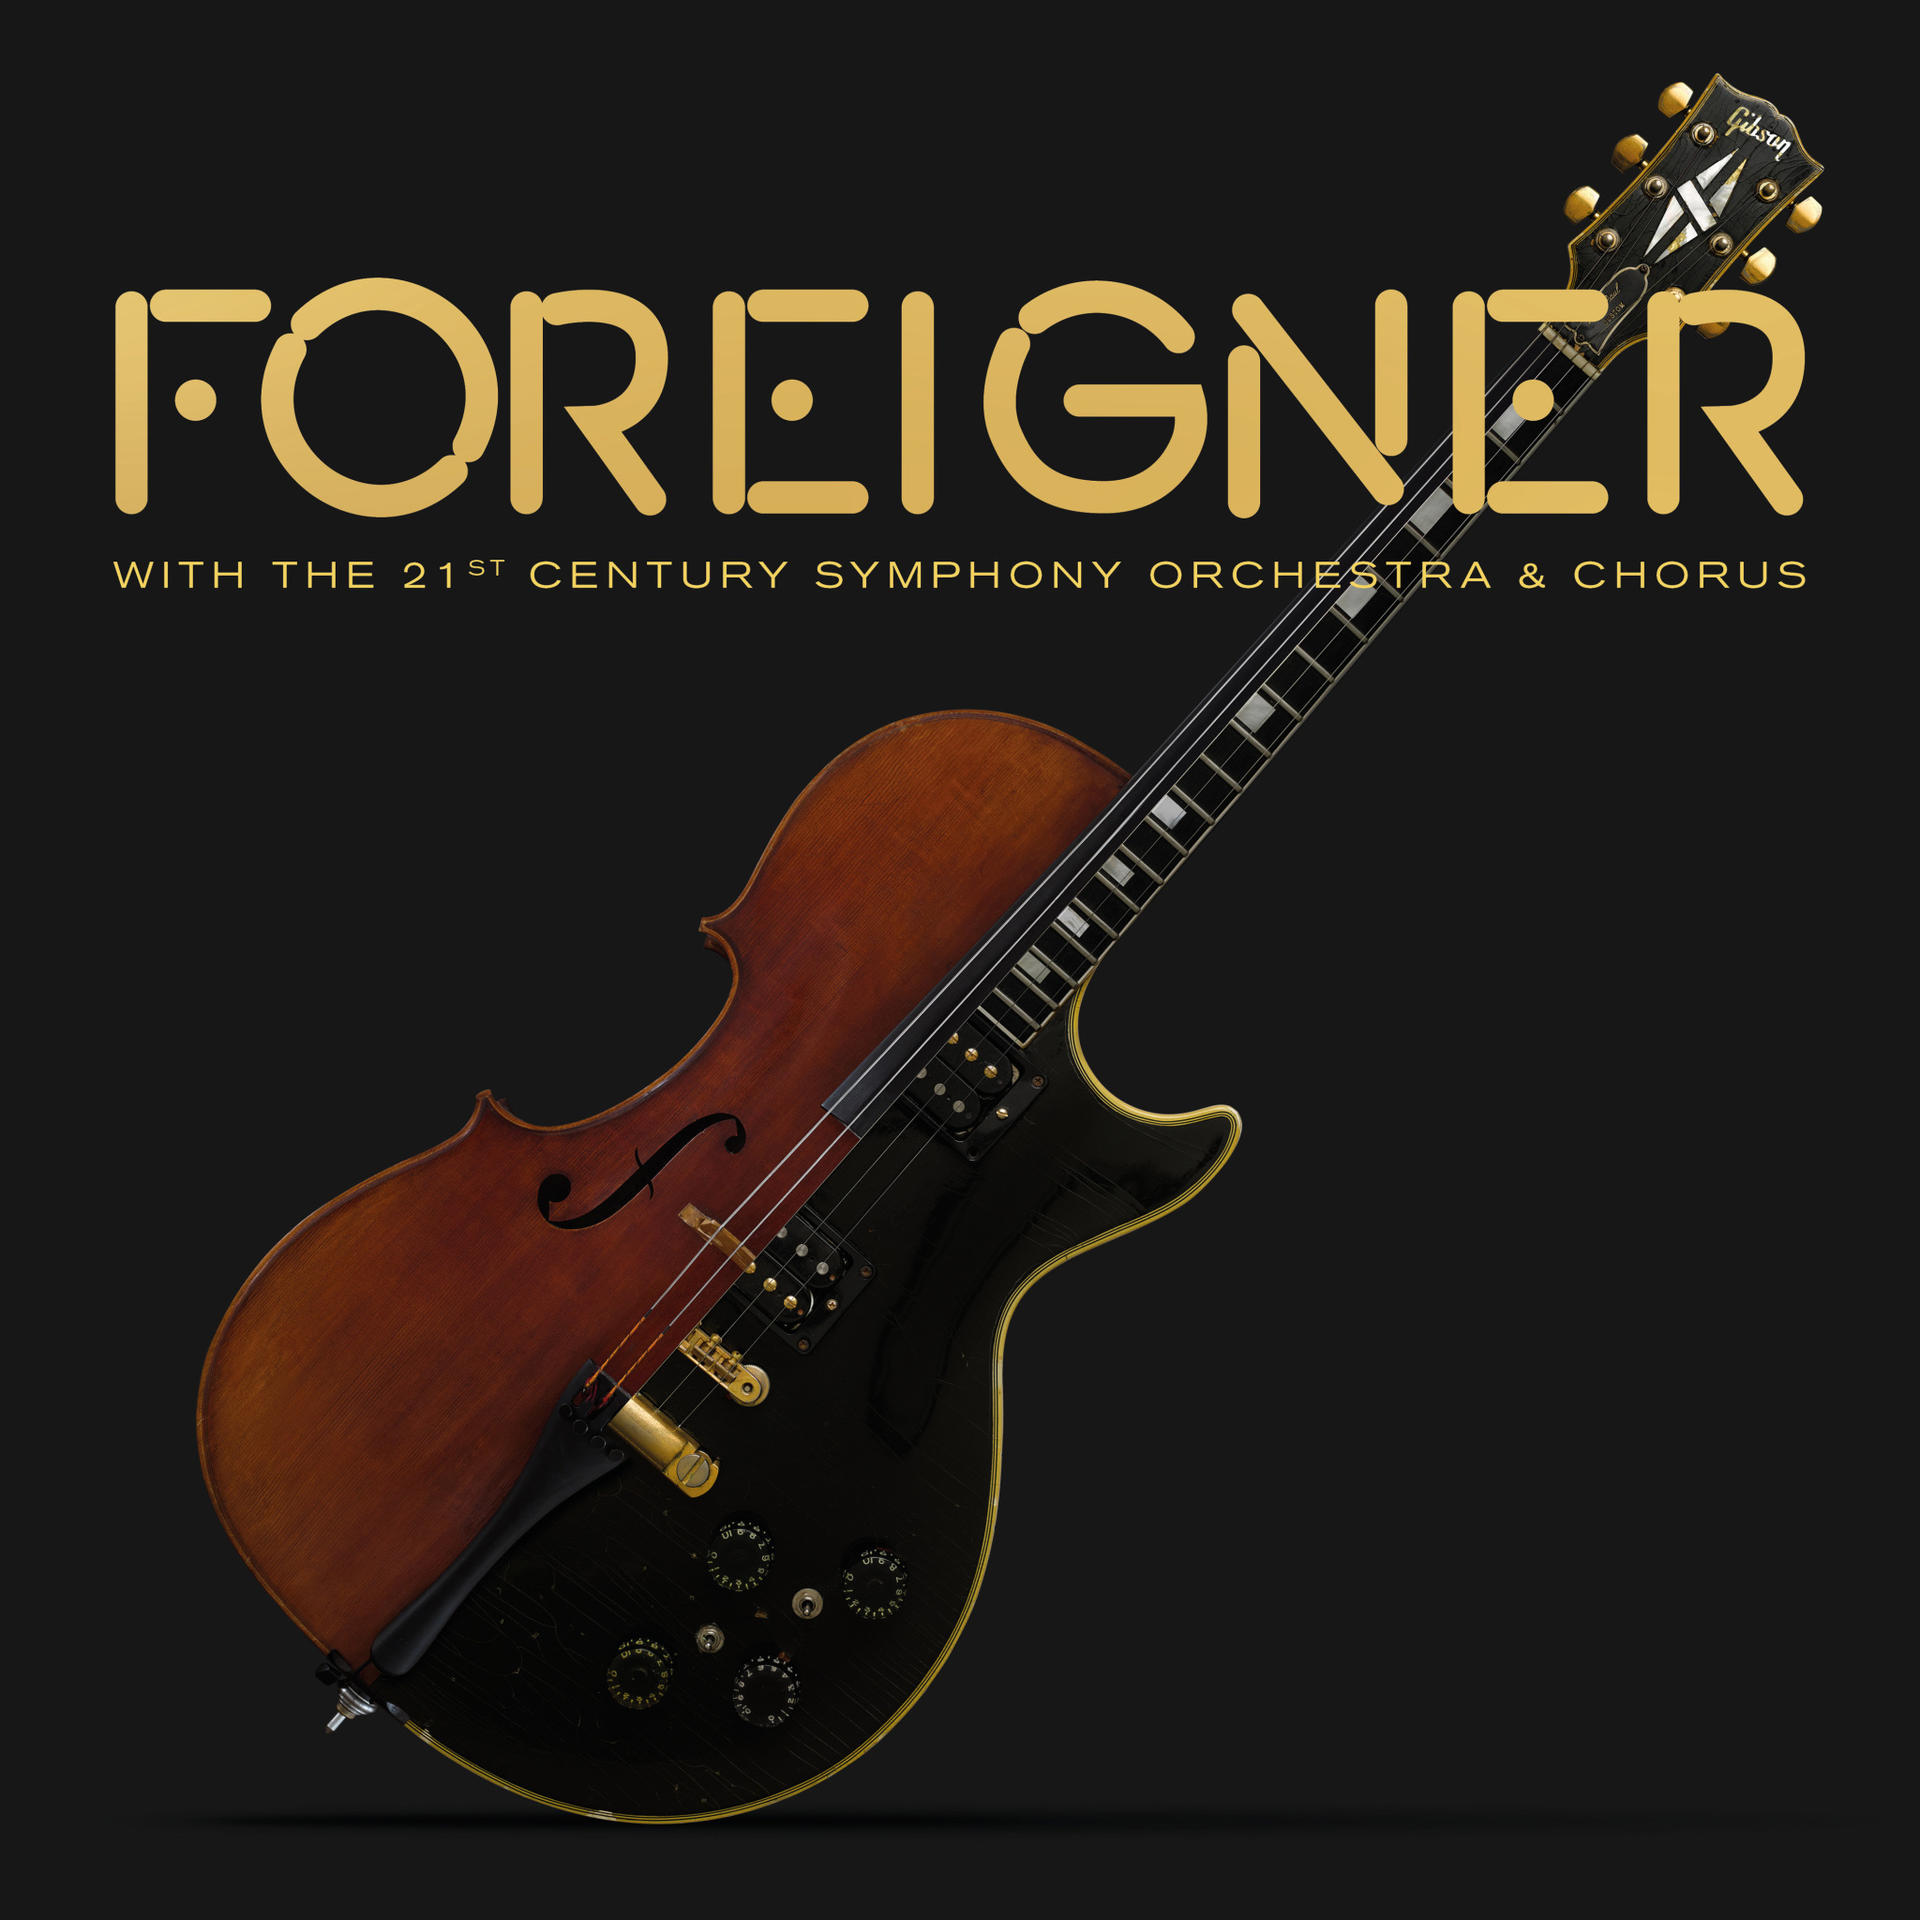 Foreigner Century Symphony With The (Vinyl) 21st - Orchestra & Chorus -